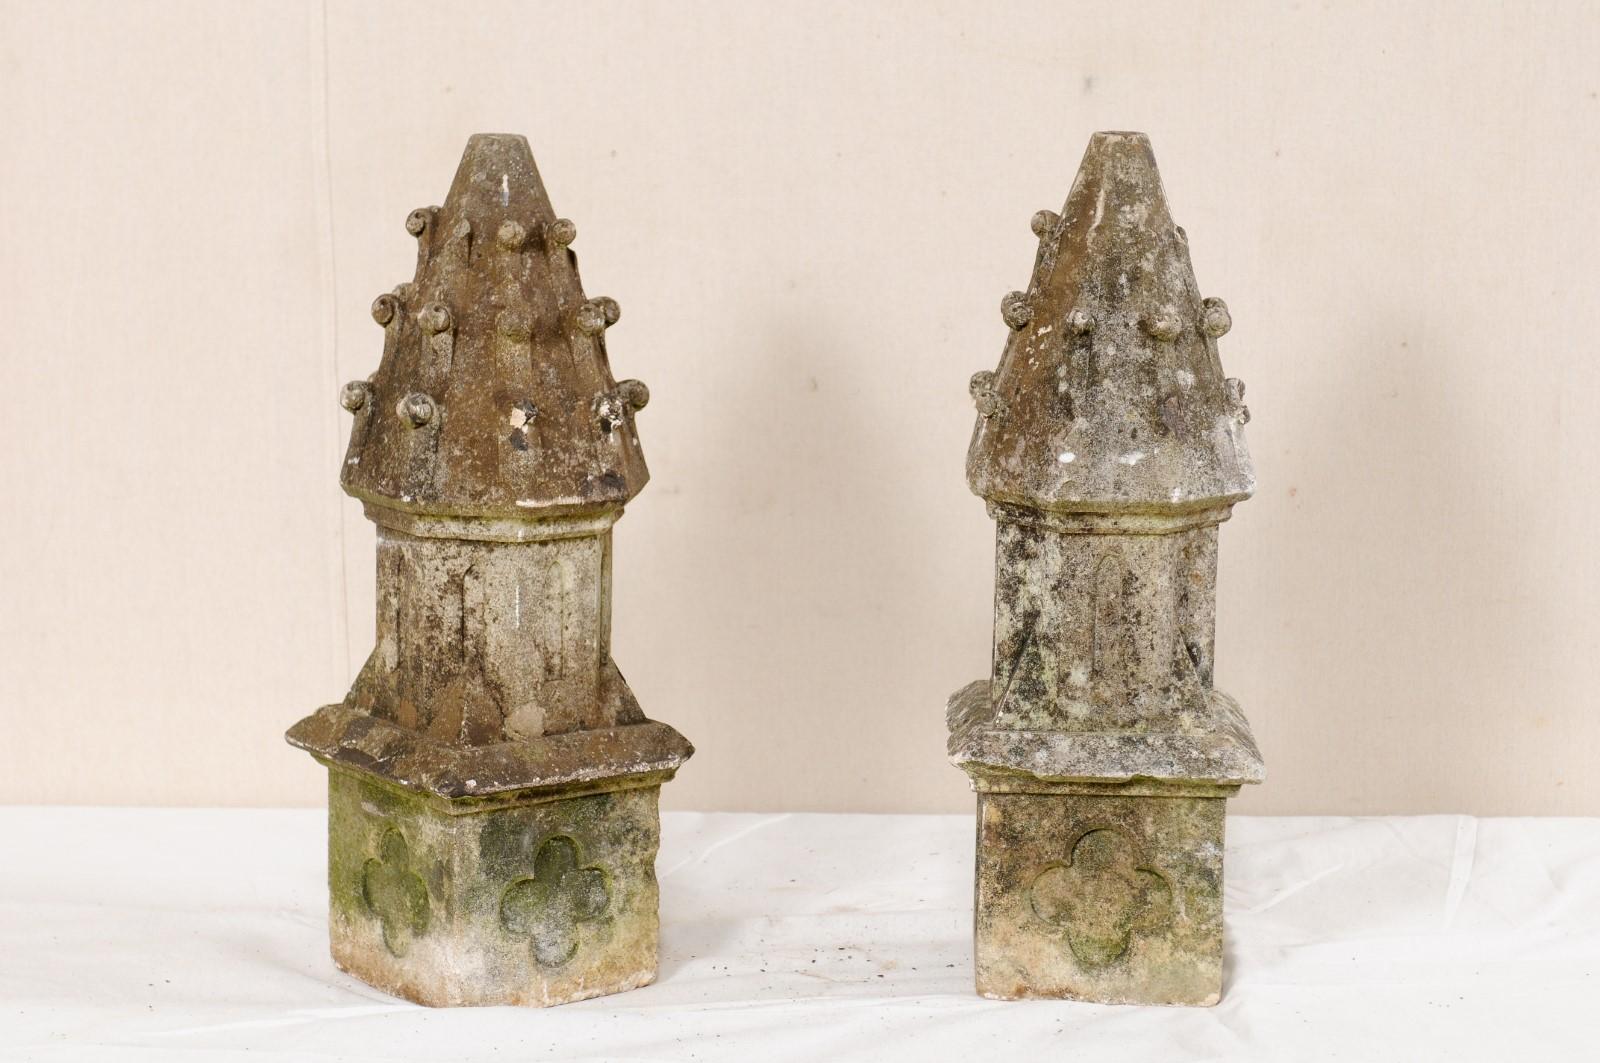 A French pair of carved stone and nicely adorn finial garden fragments. This vintage pair of French fragments, each standing approximately 23